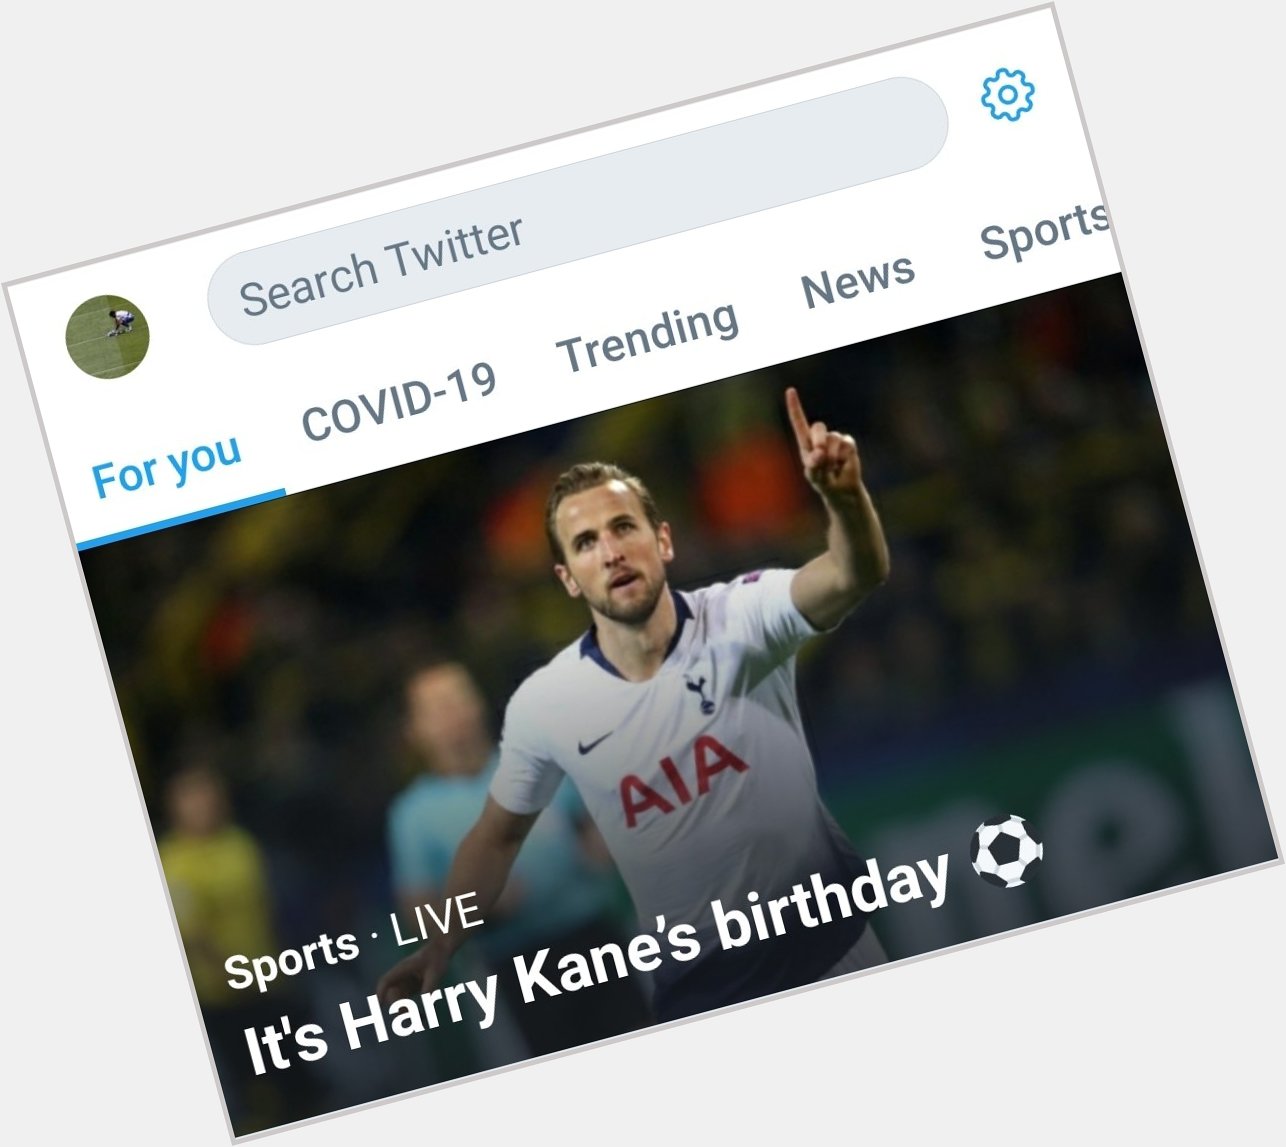 How much did Harry Kane pay for this? Happy birthday but come on message. 